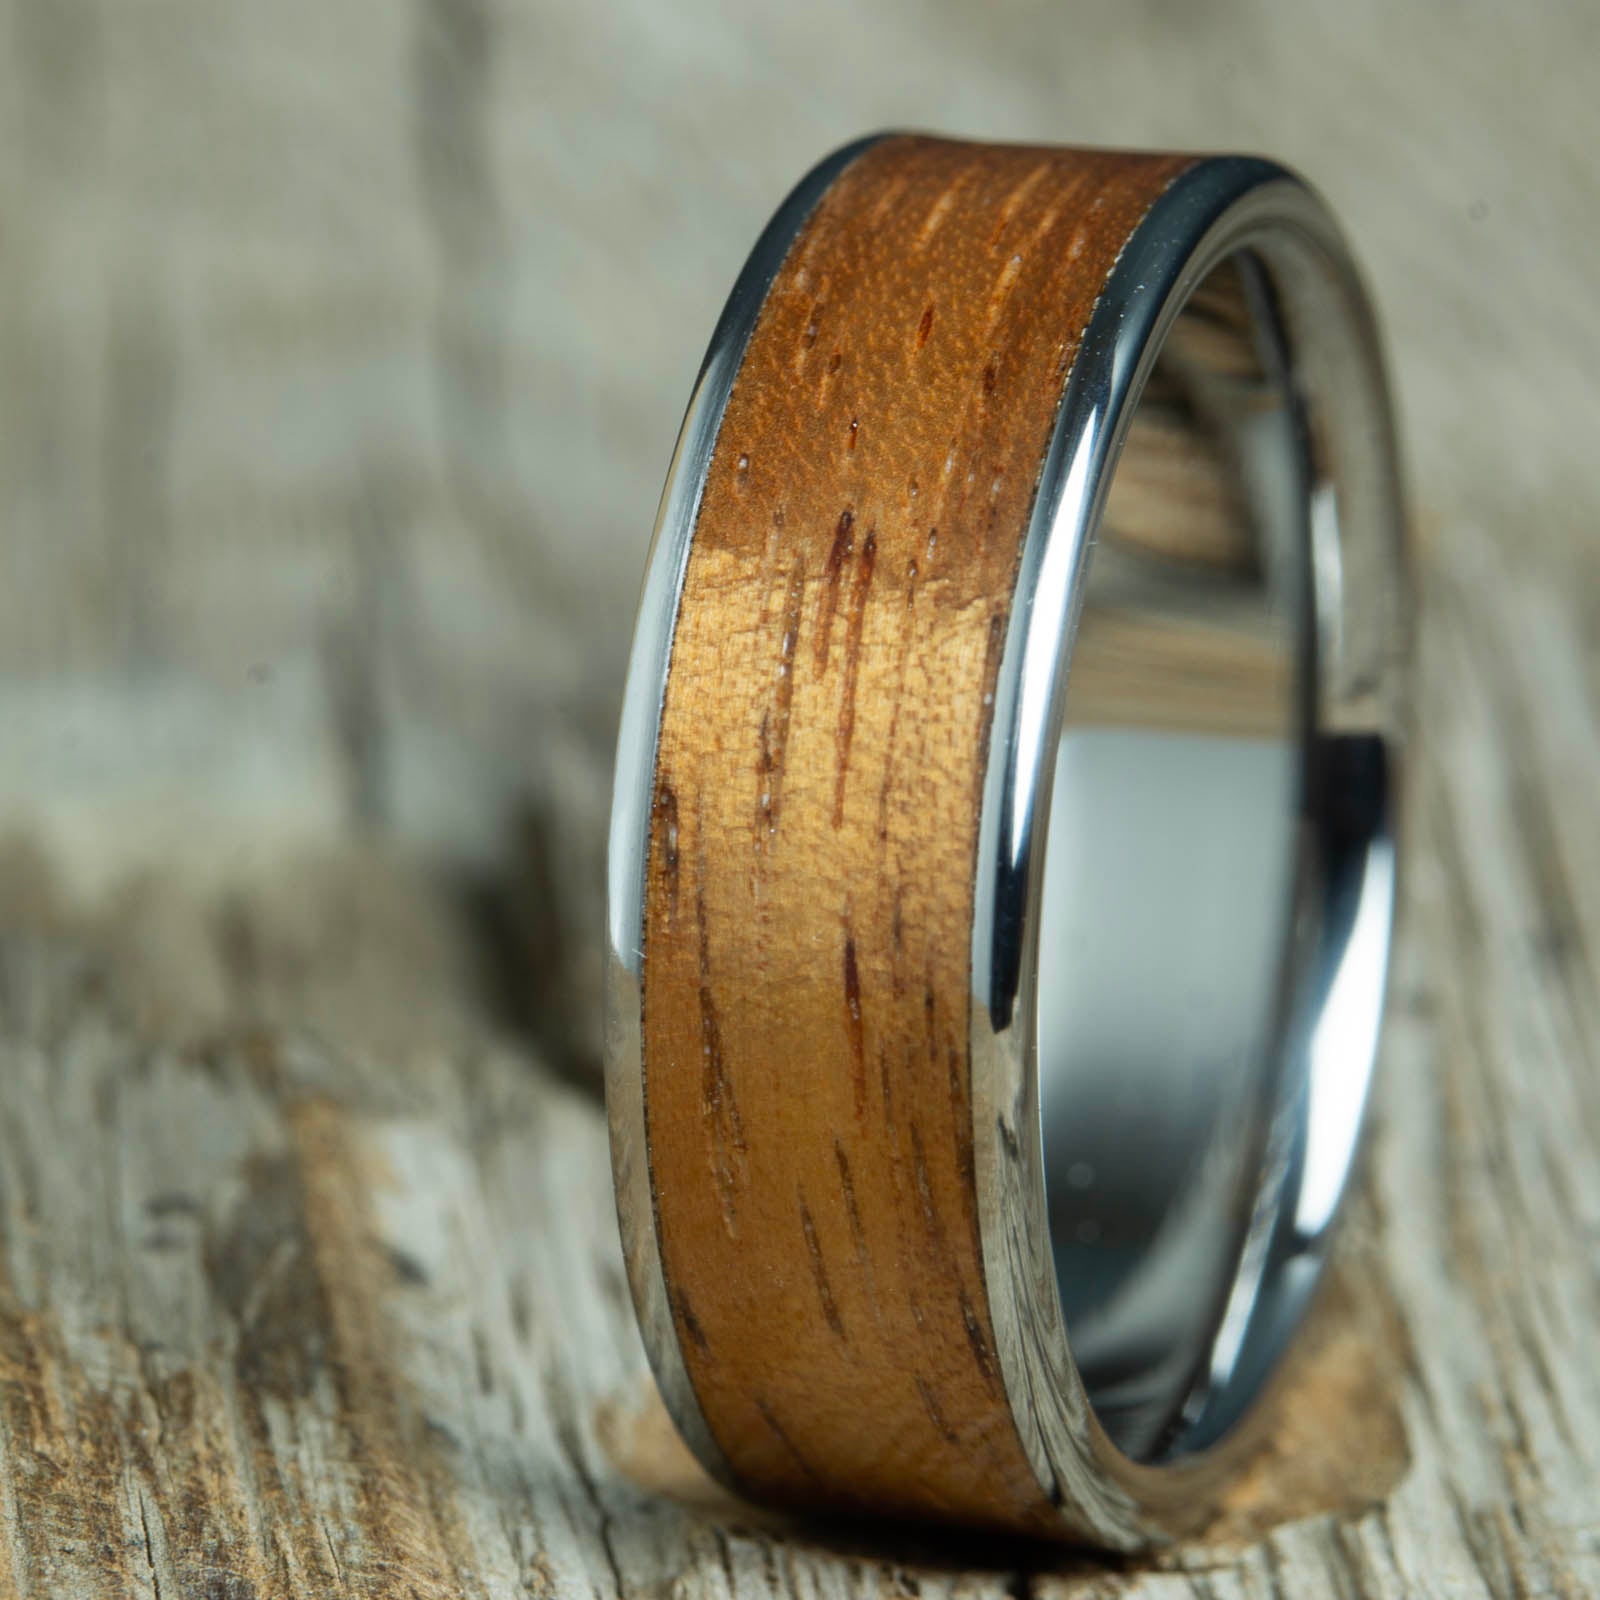 mens wood wedding band with Koa wood inlay and polished titanium. Handcrafted wood wedding rings with real Koa wood inlay for Men. Any finger size from 5 to 14 and widths from 5mm to 10mm. Free shipping, 30 day returns and lifetime warranty includes refinishing